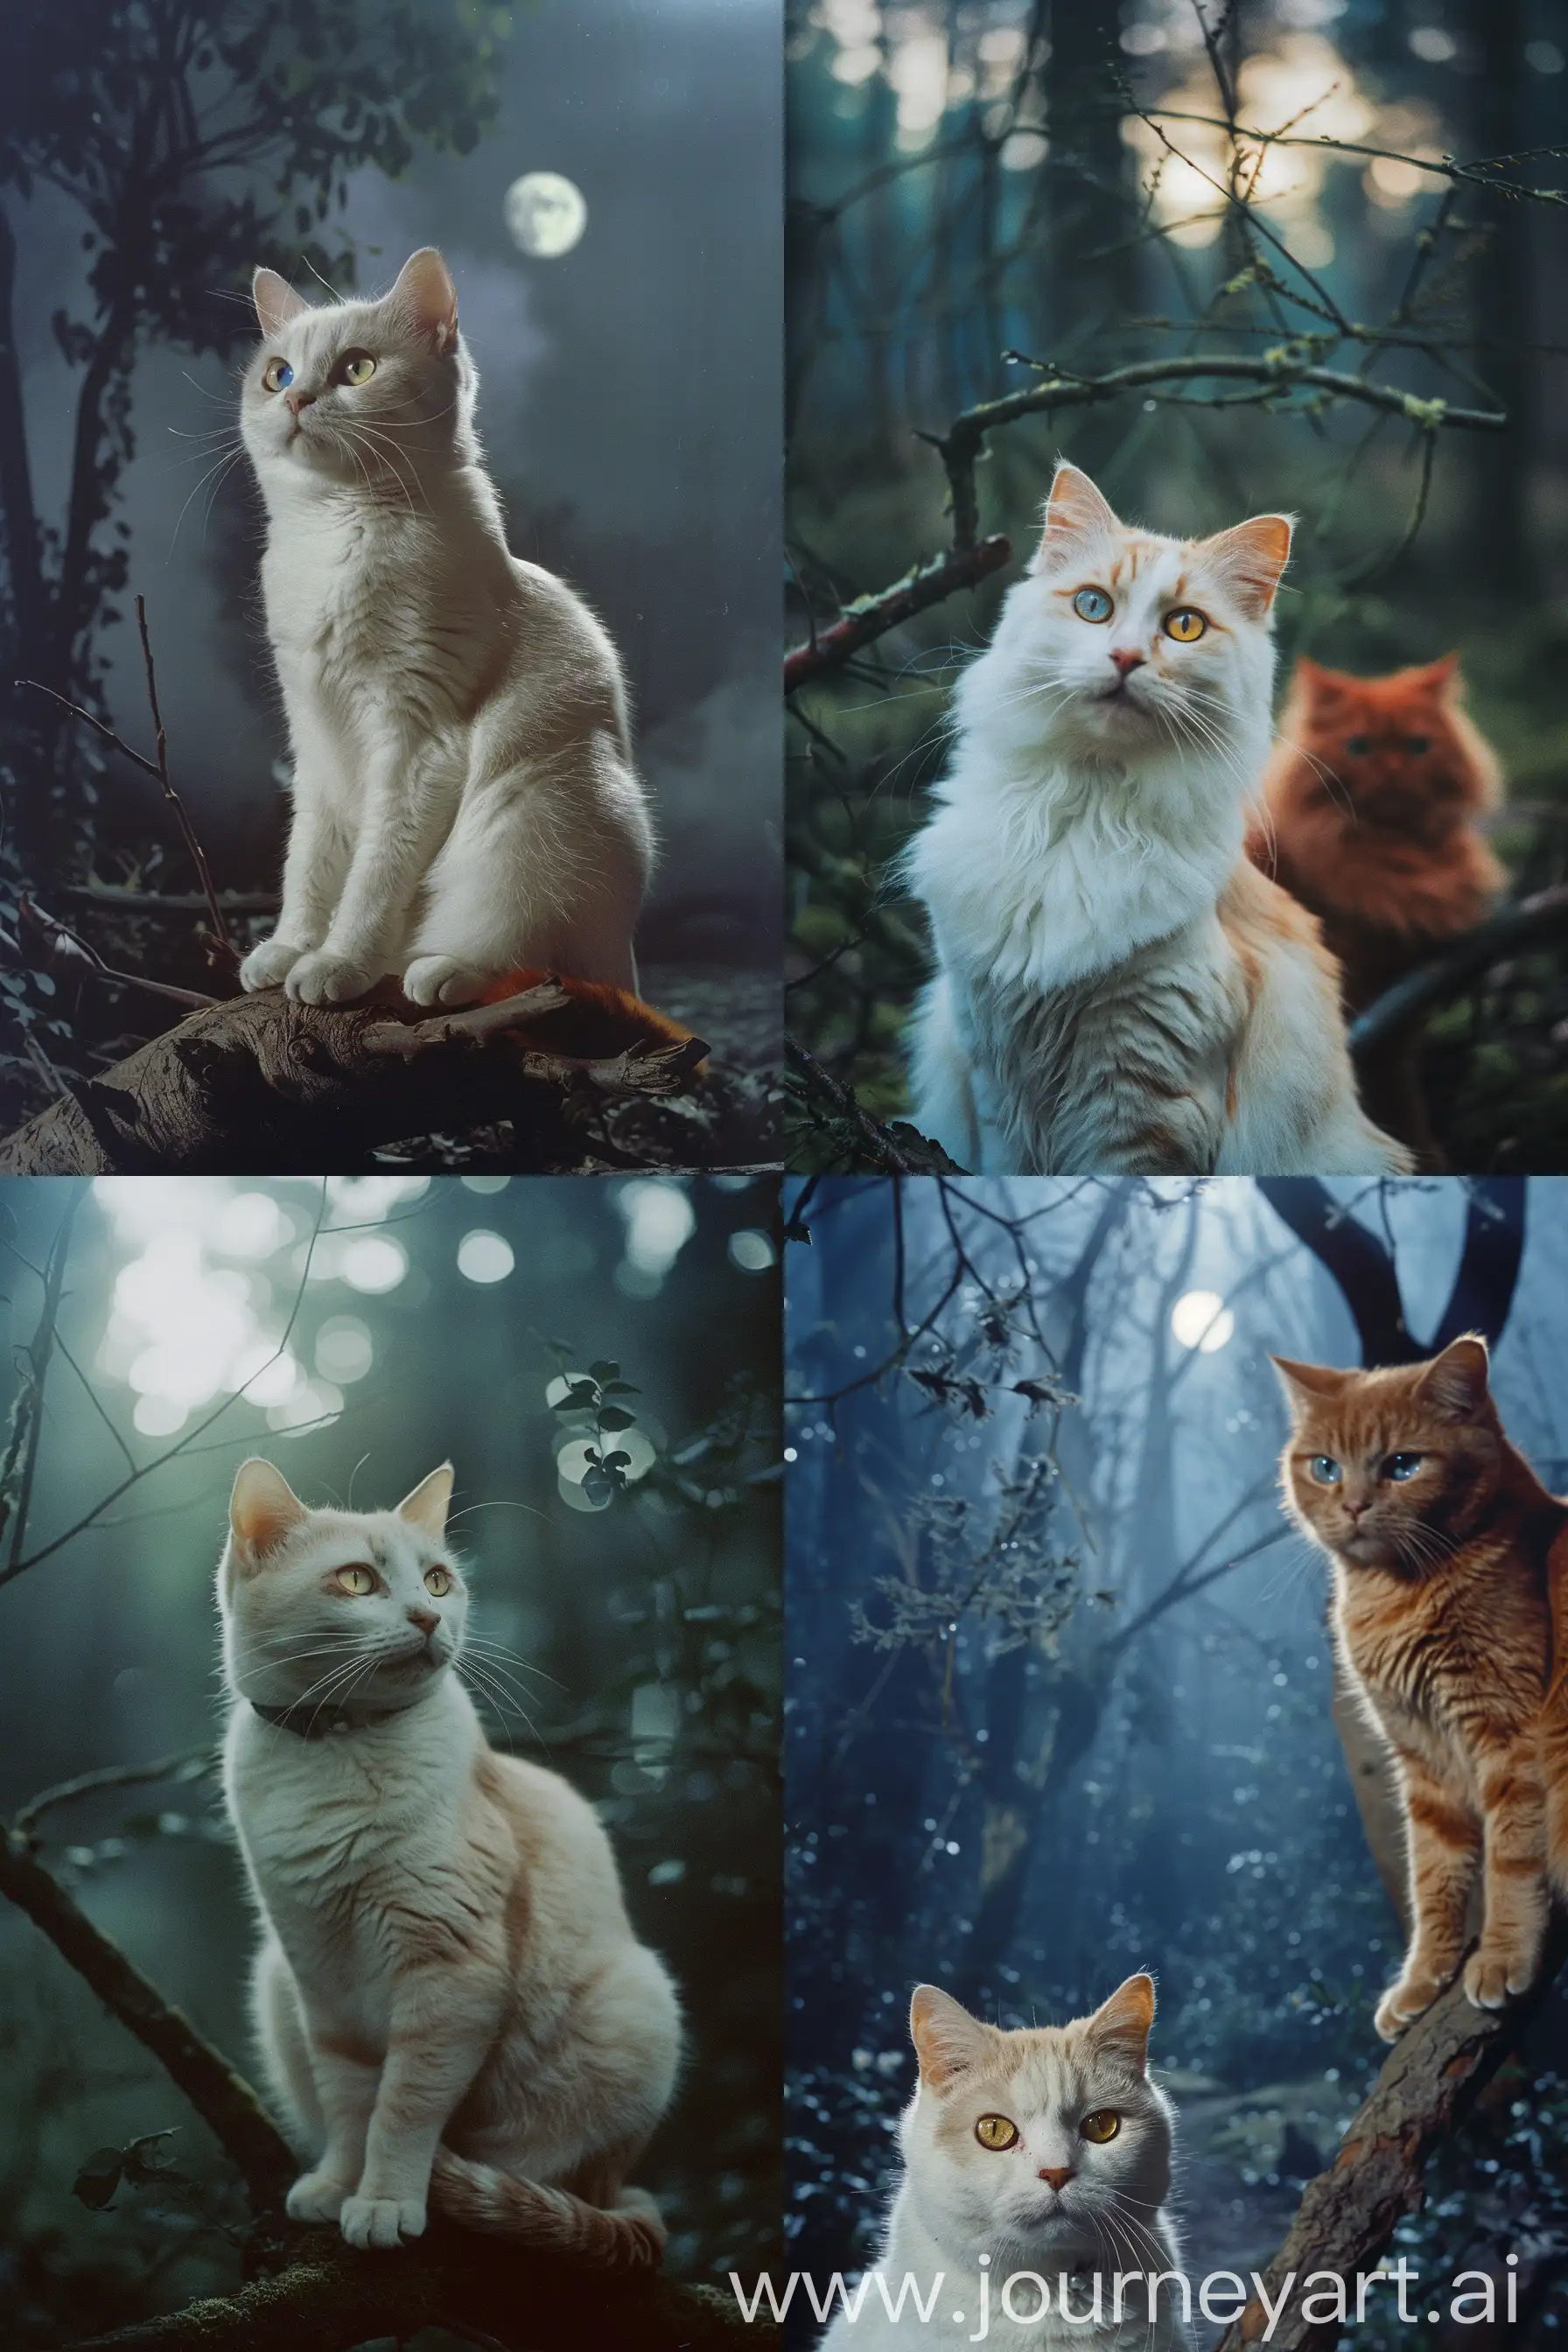 Enigmatic-Forest-Cats-Under-Moonlight-Captured-with-Vintage-Film-Camera